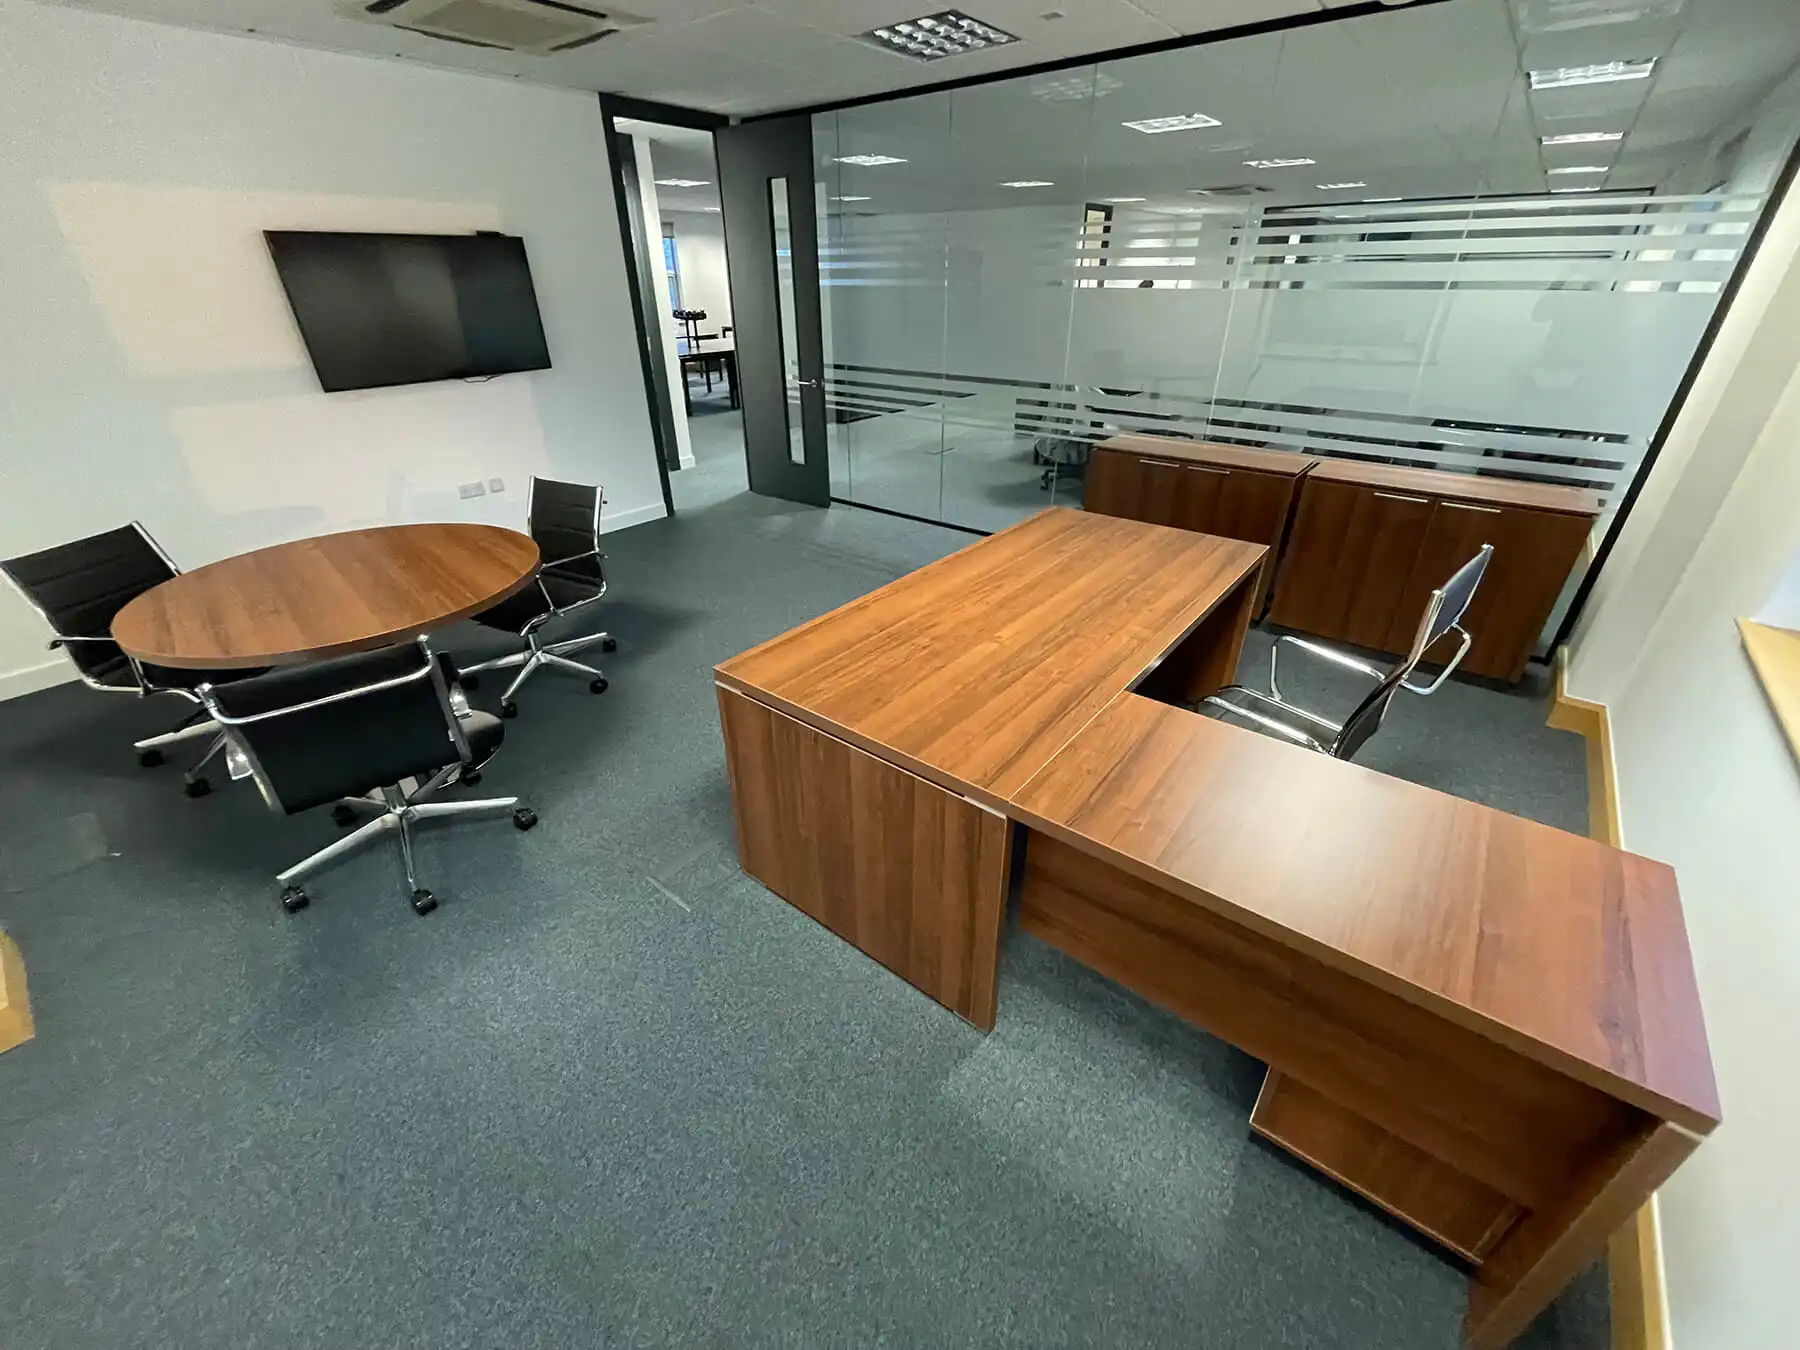 Flately Office with executive and meeting desks chairs and glass partitions with manifestation